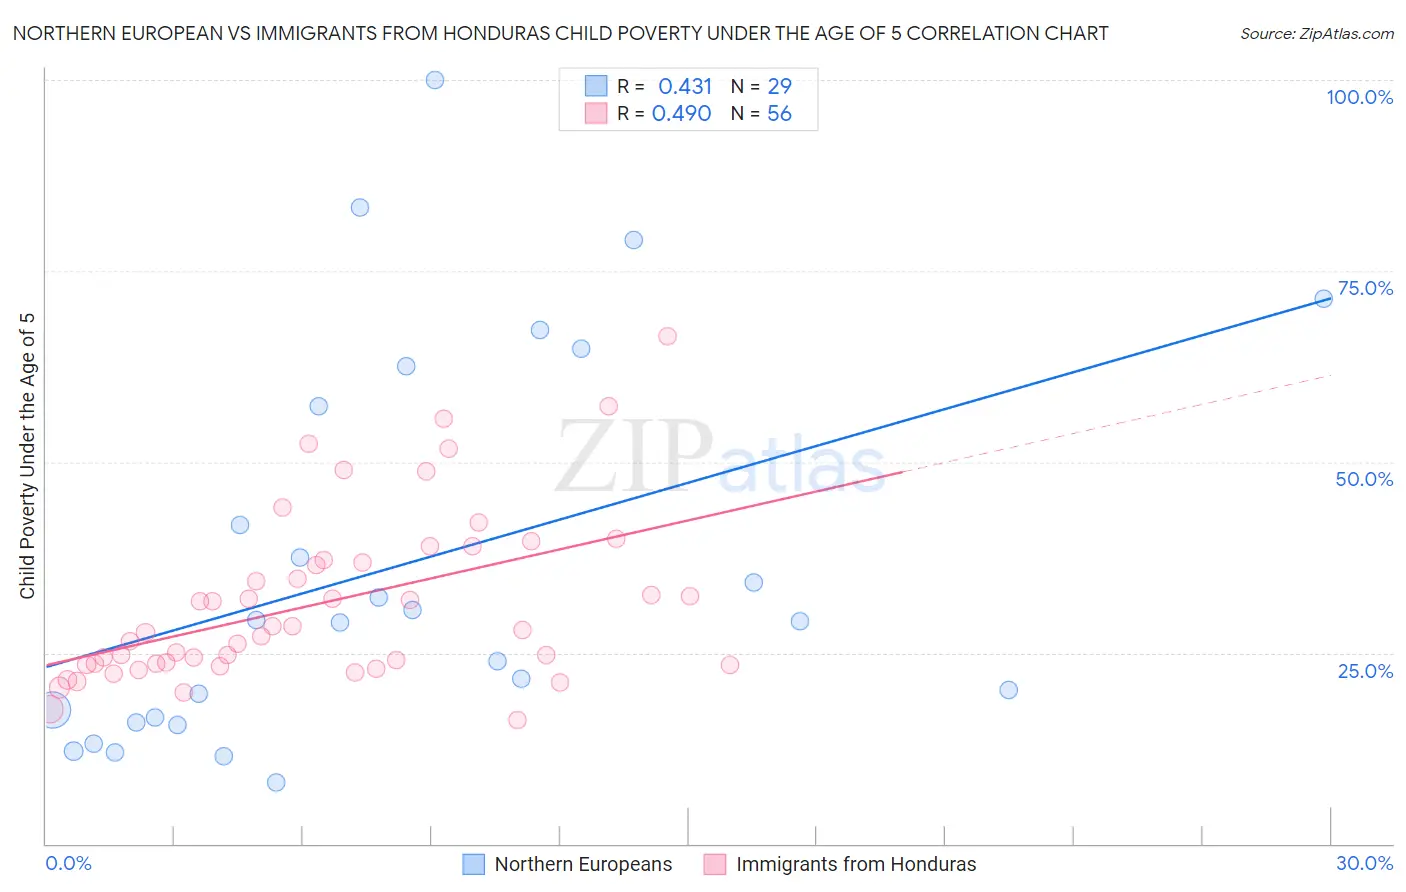 Northern European vs Immigrants from Honduras Child Poverty Under the Age of 5